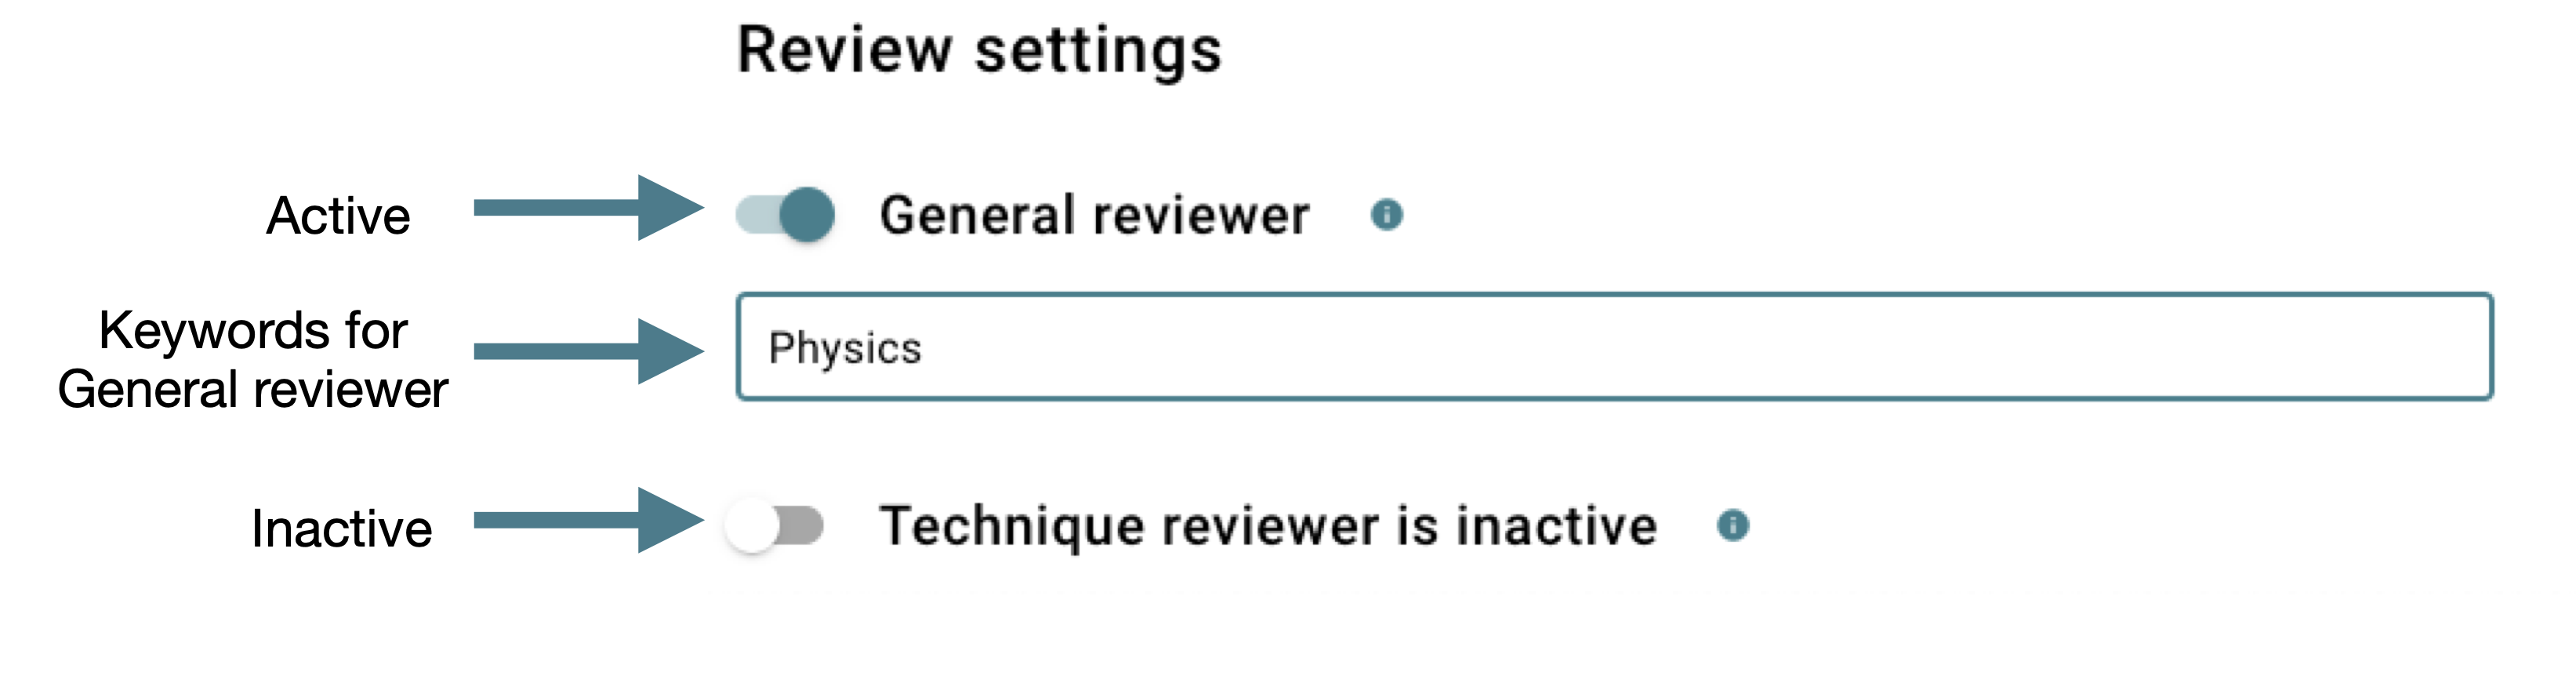 ReviewSettings.png